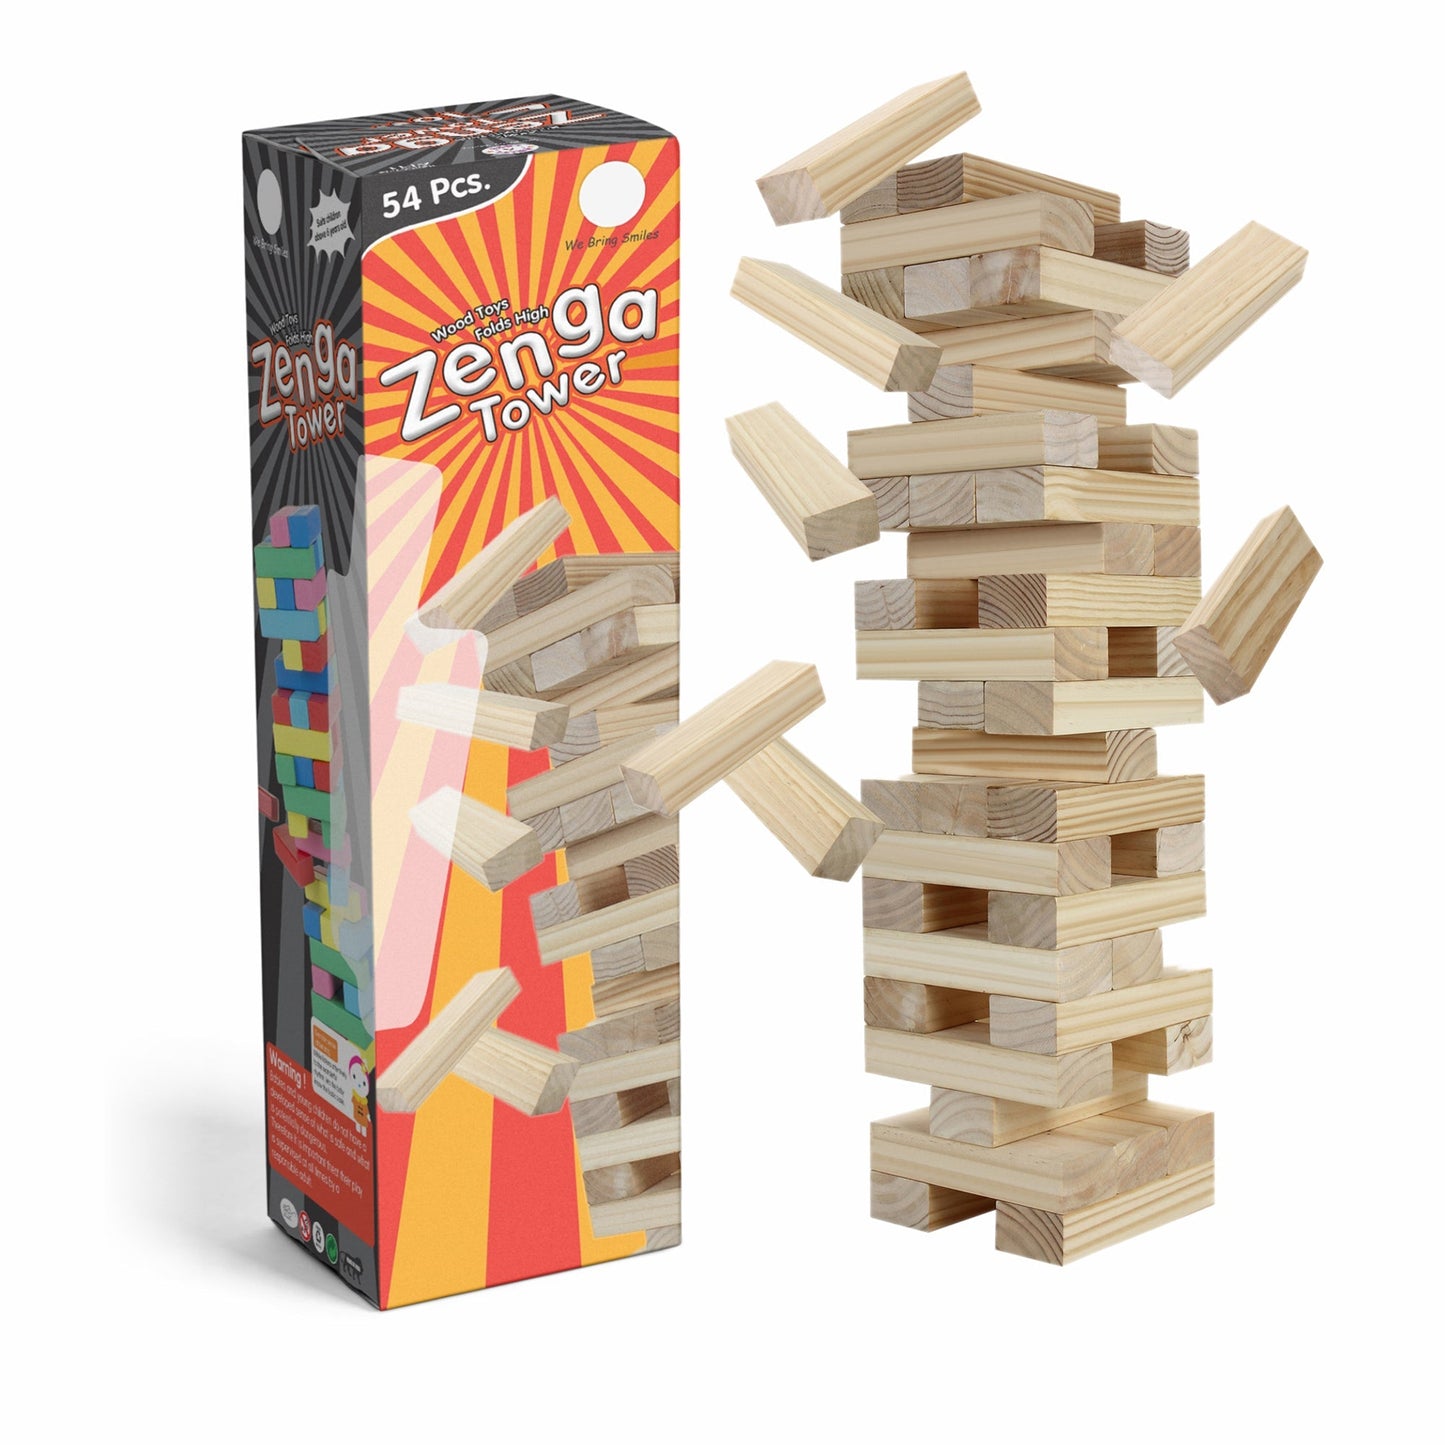 54 Pcs Blocks 4 Dices Wooden Tumbling Stacking Building